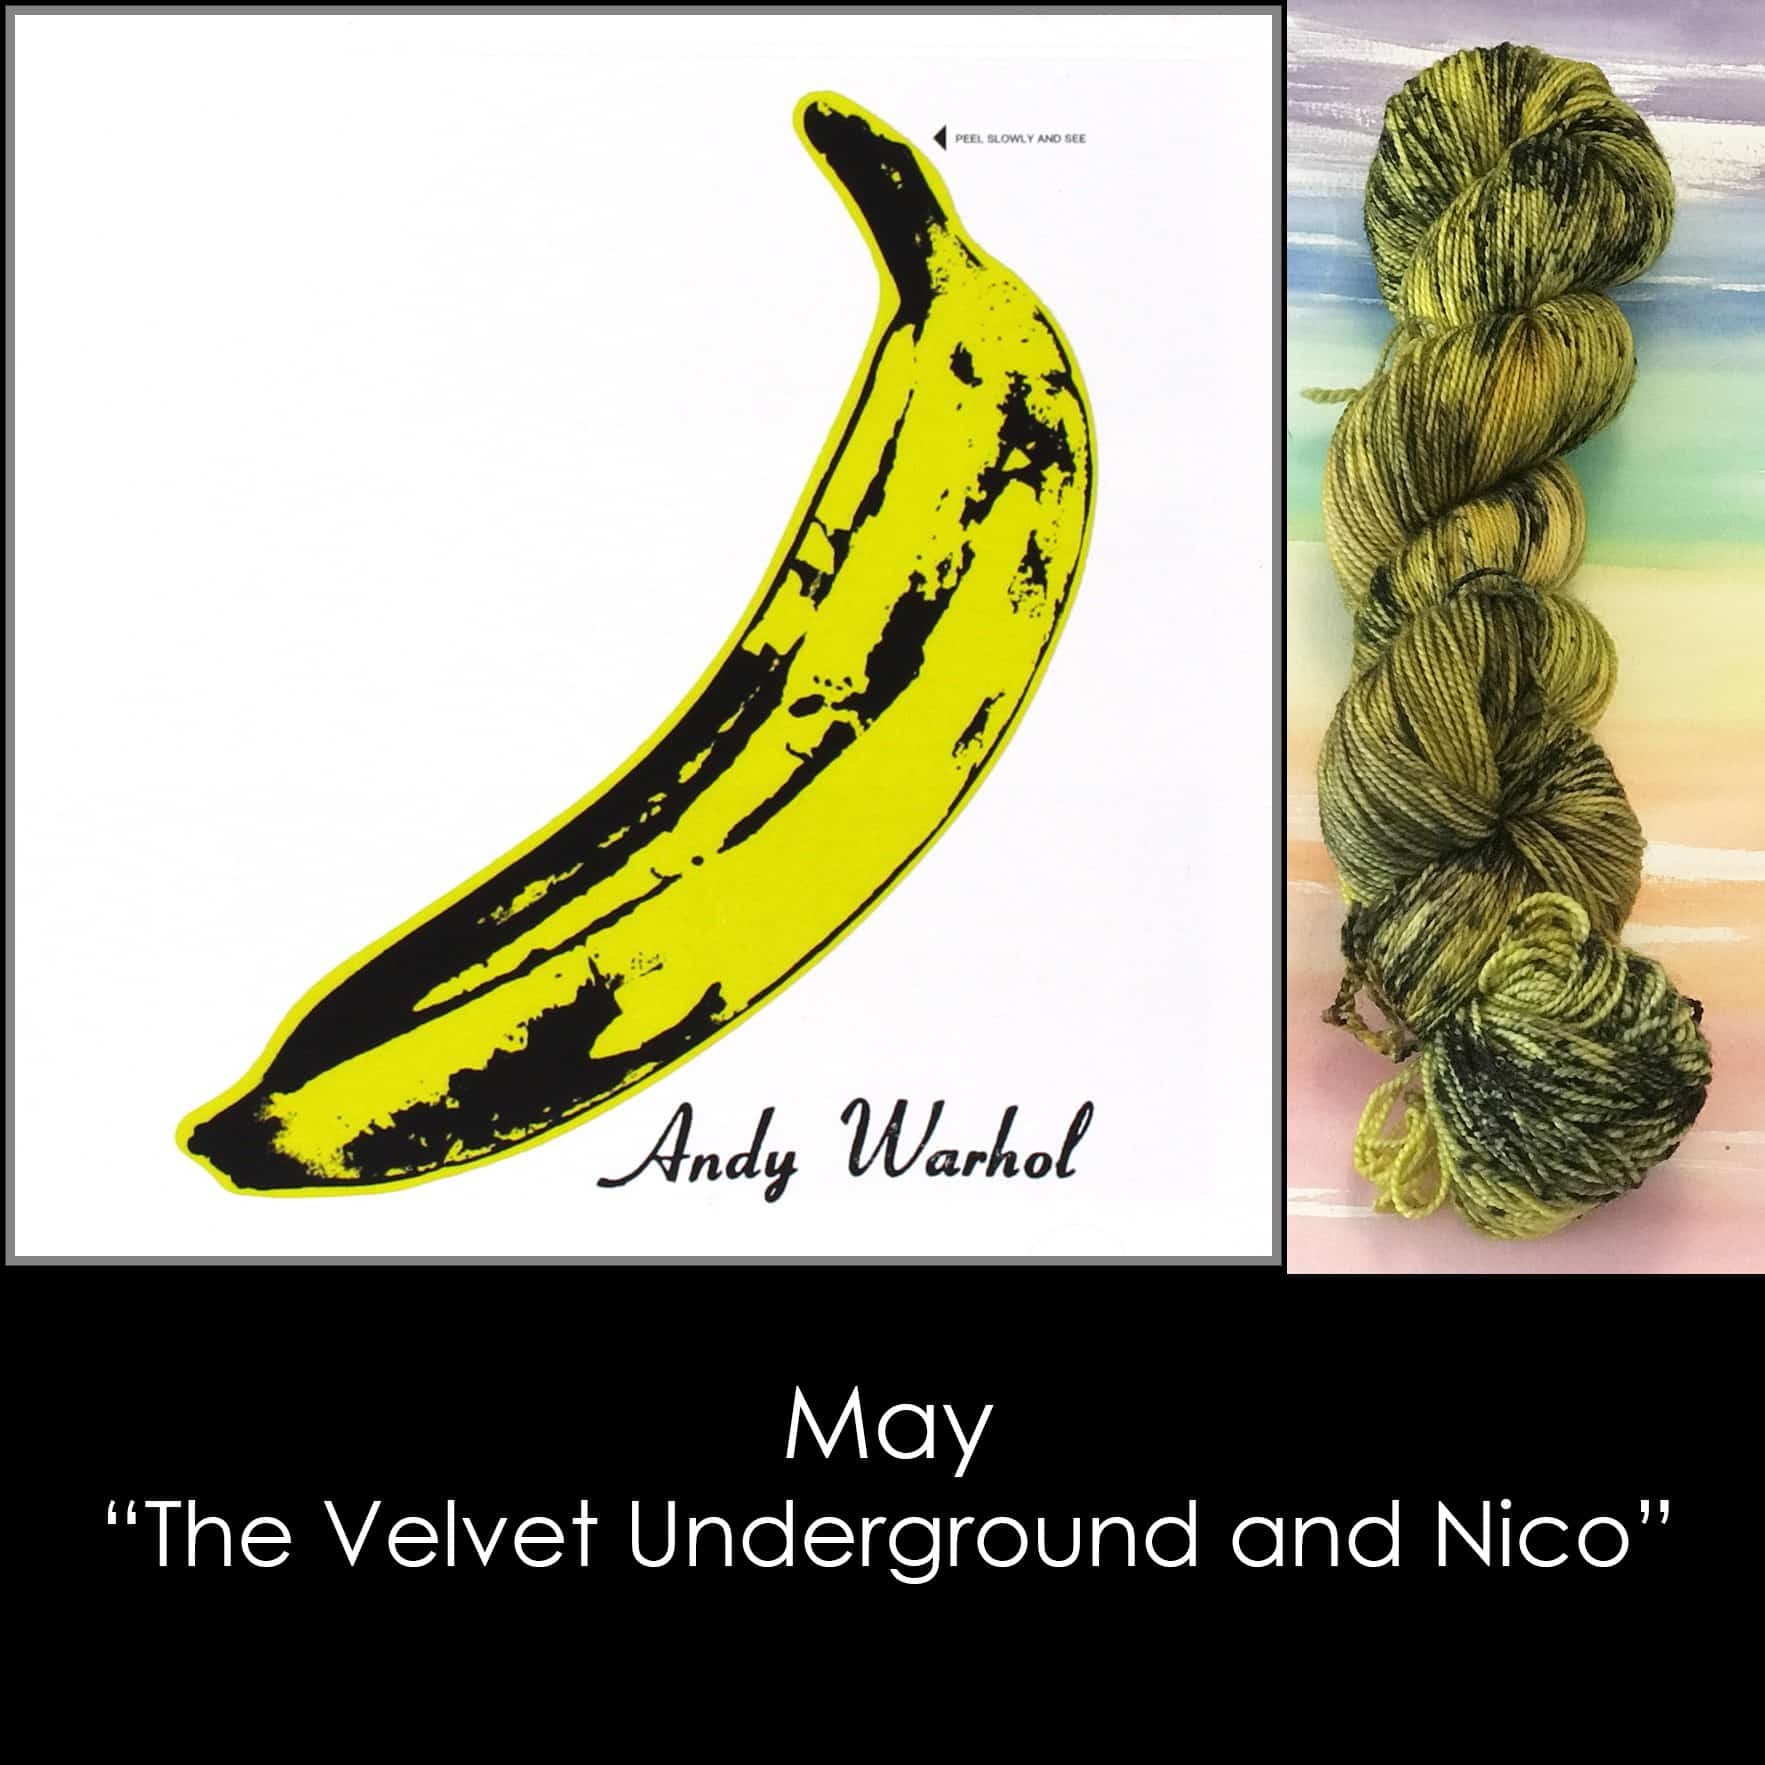 An album cover featuring a yellow and black banana and the text Andy Warhol, next to a yellow skein of yarn with black speckles.